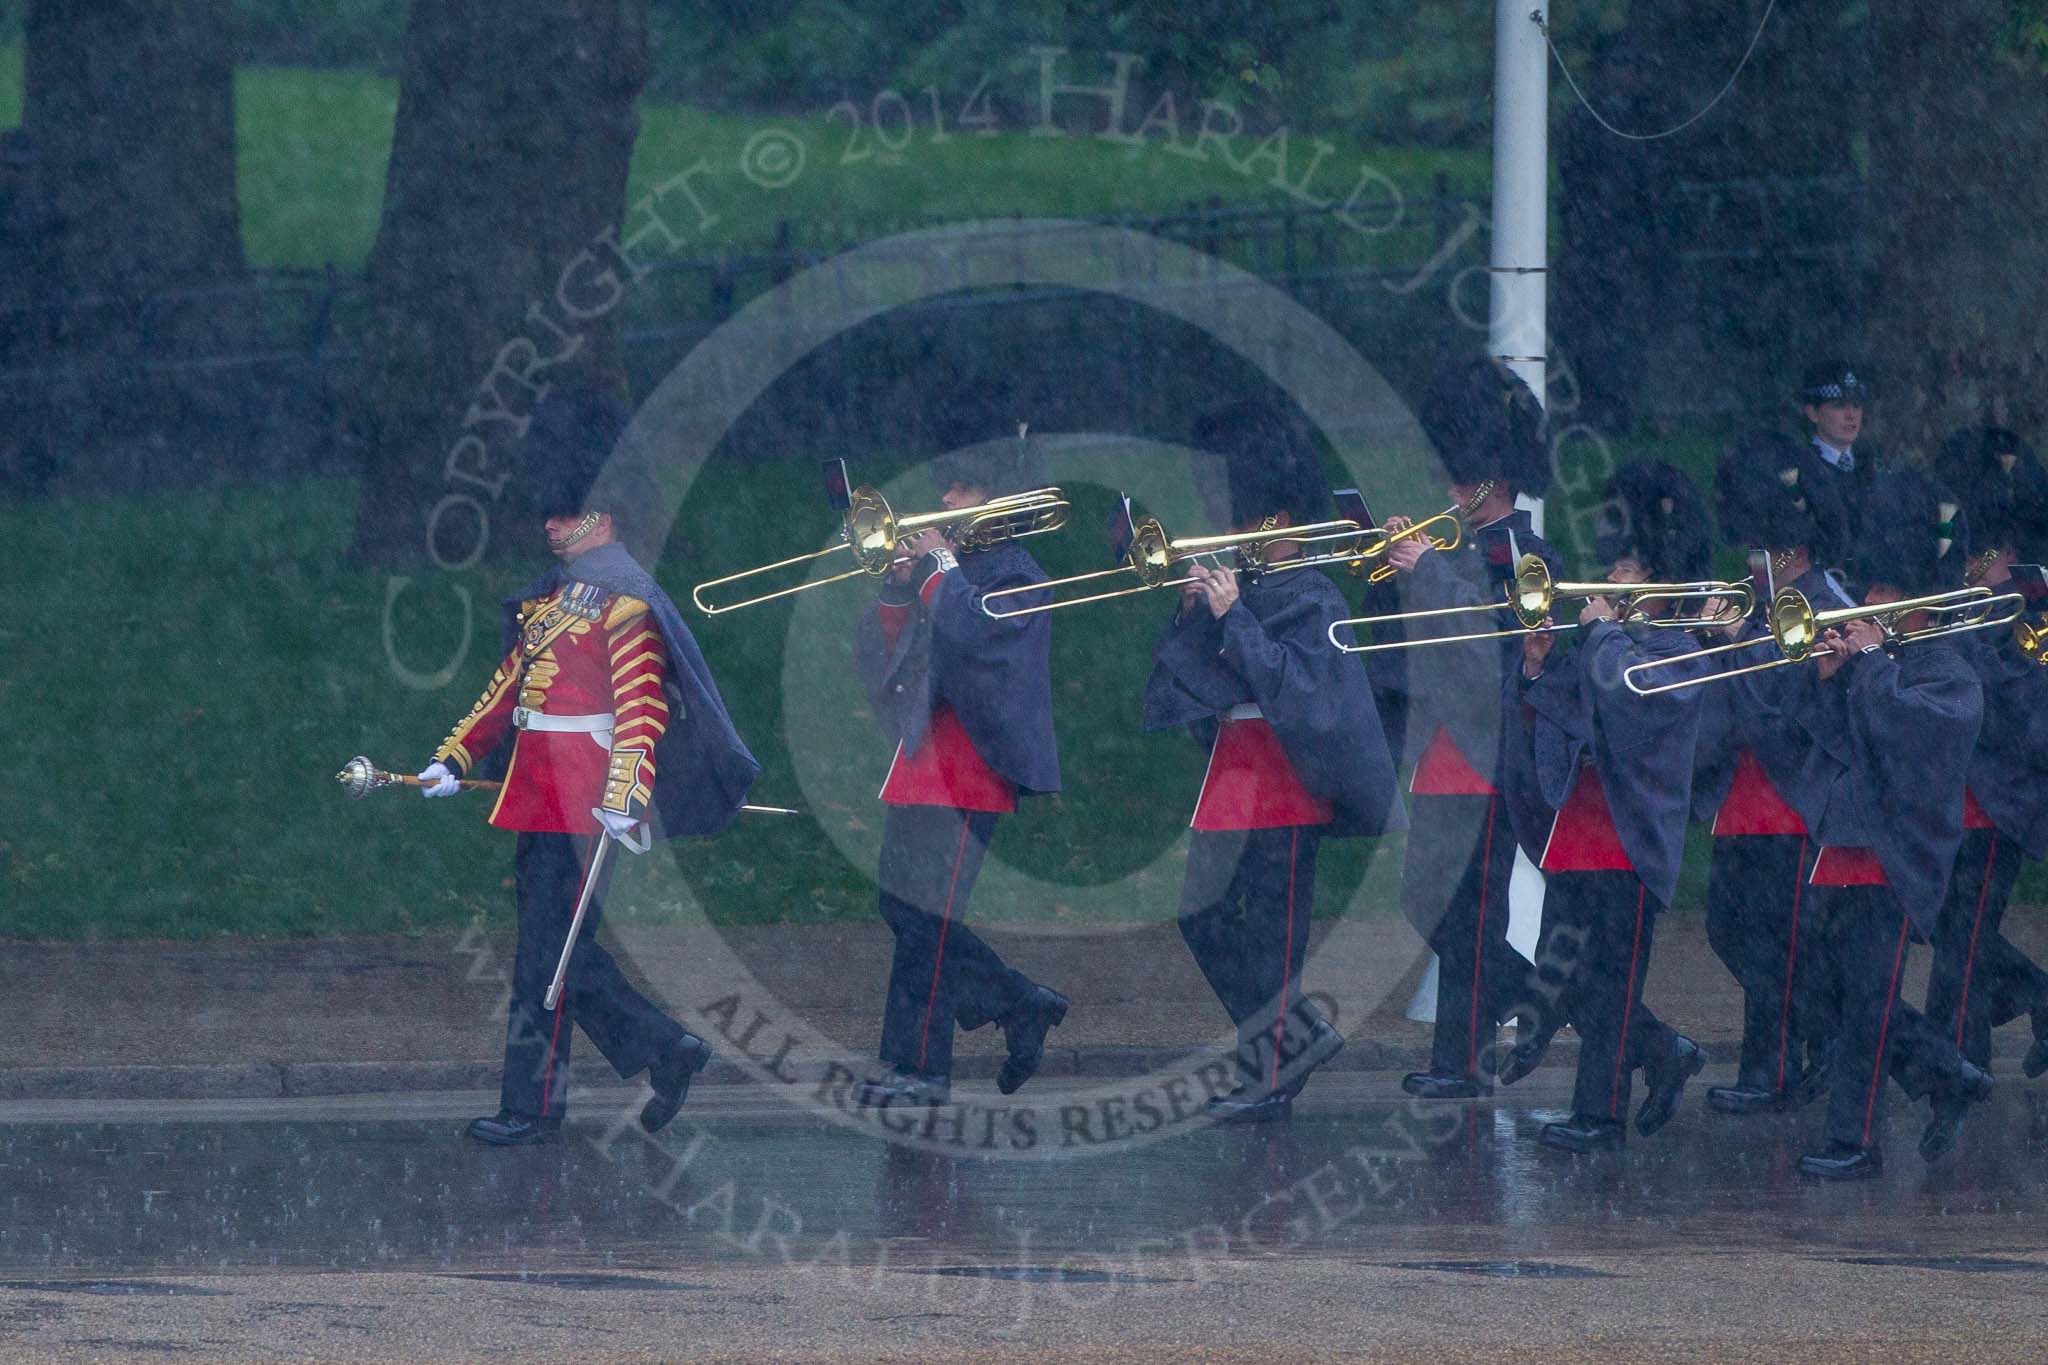 The Colonel's Review 2014.
Horse Guards Parade, Westminster,
London,

United Kingdom,
on 07 June 2014 at 10:01, image #33